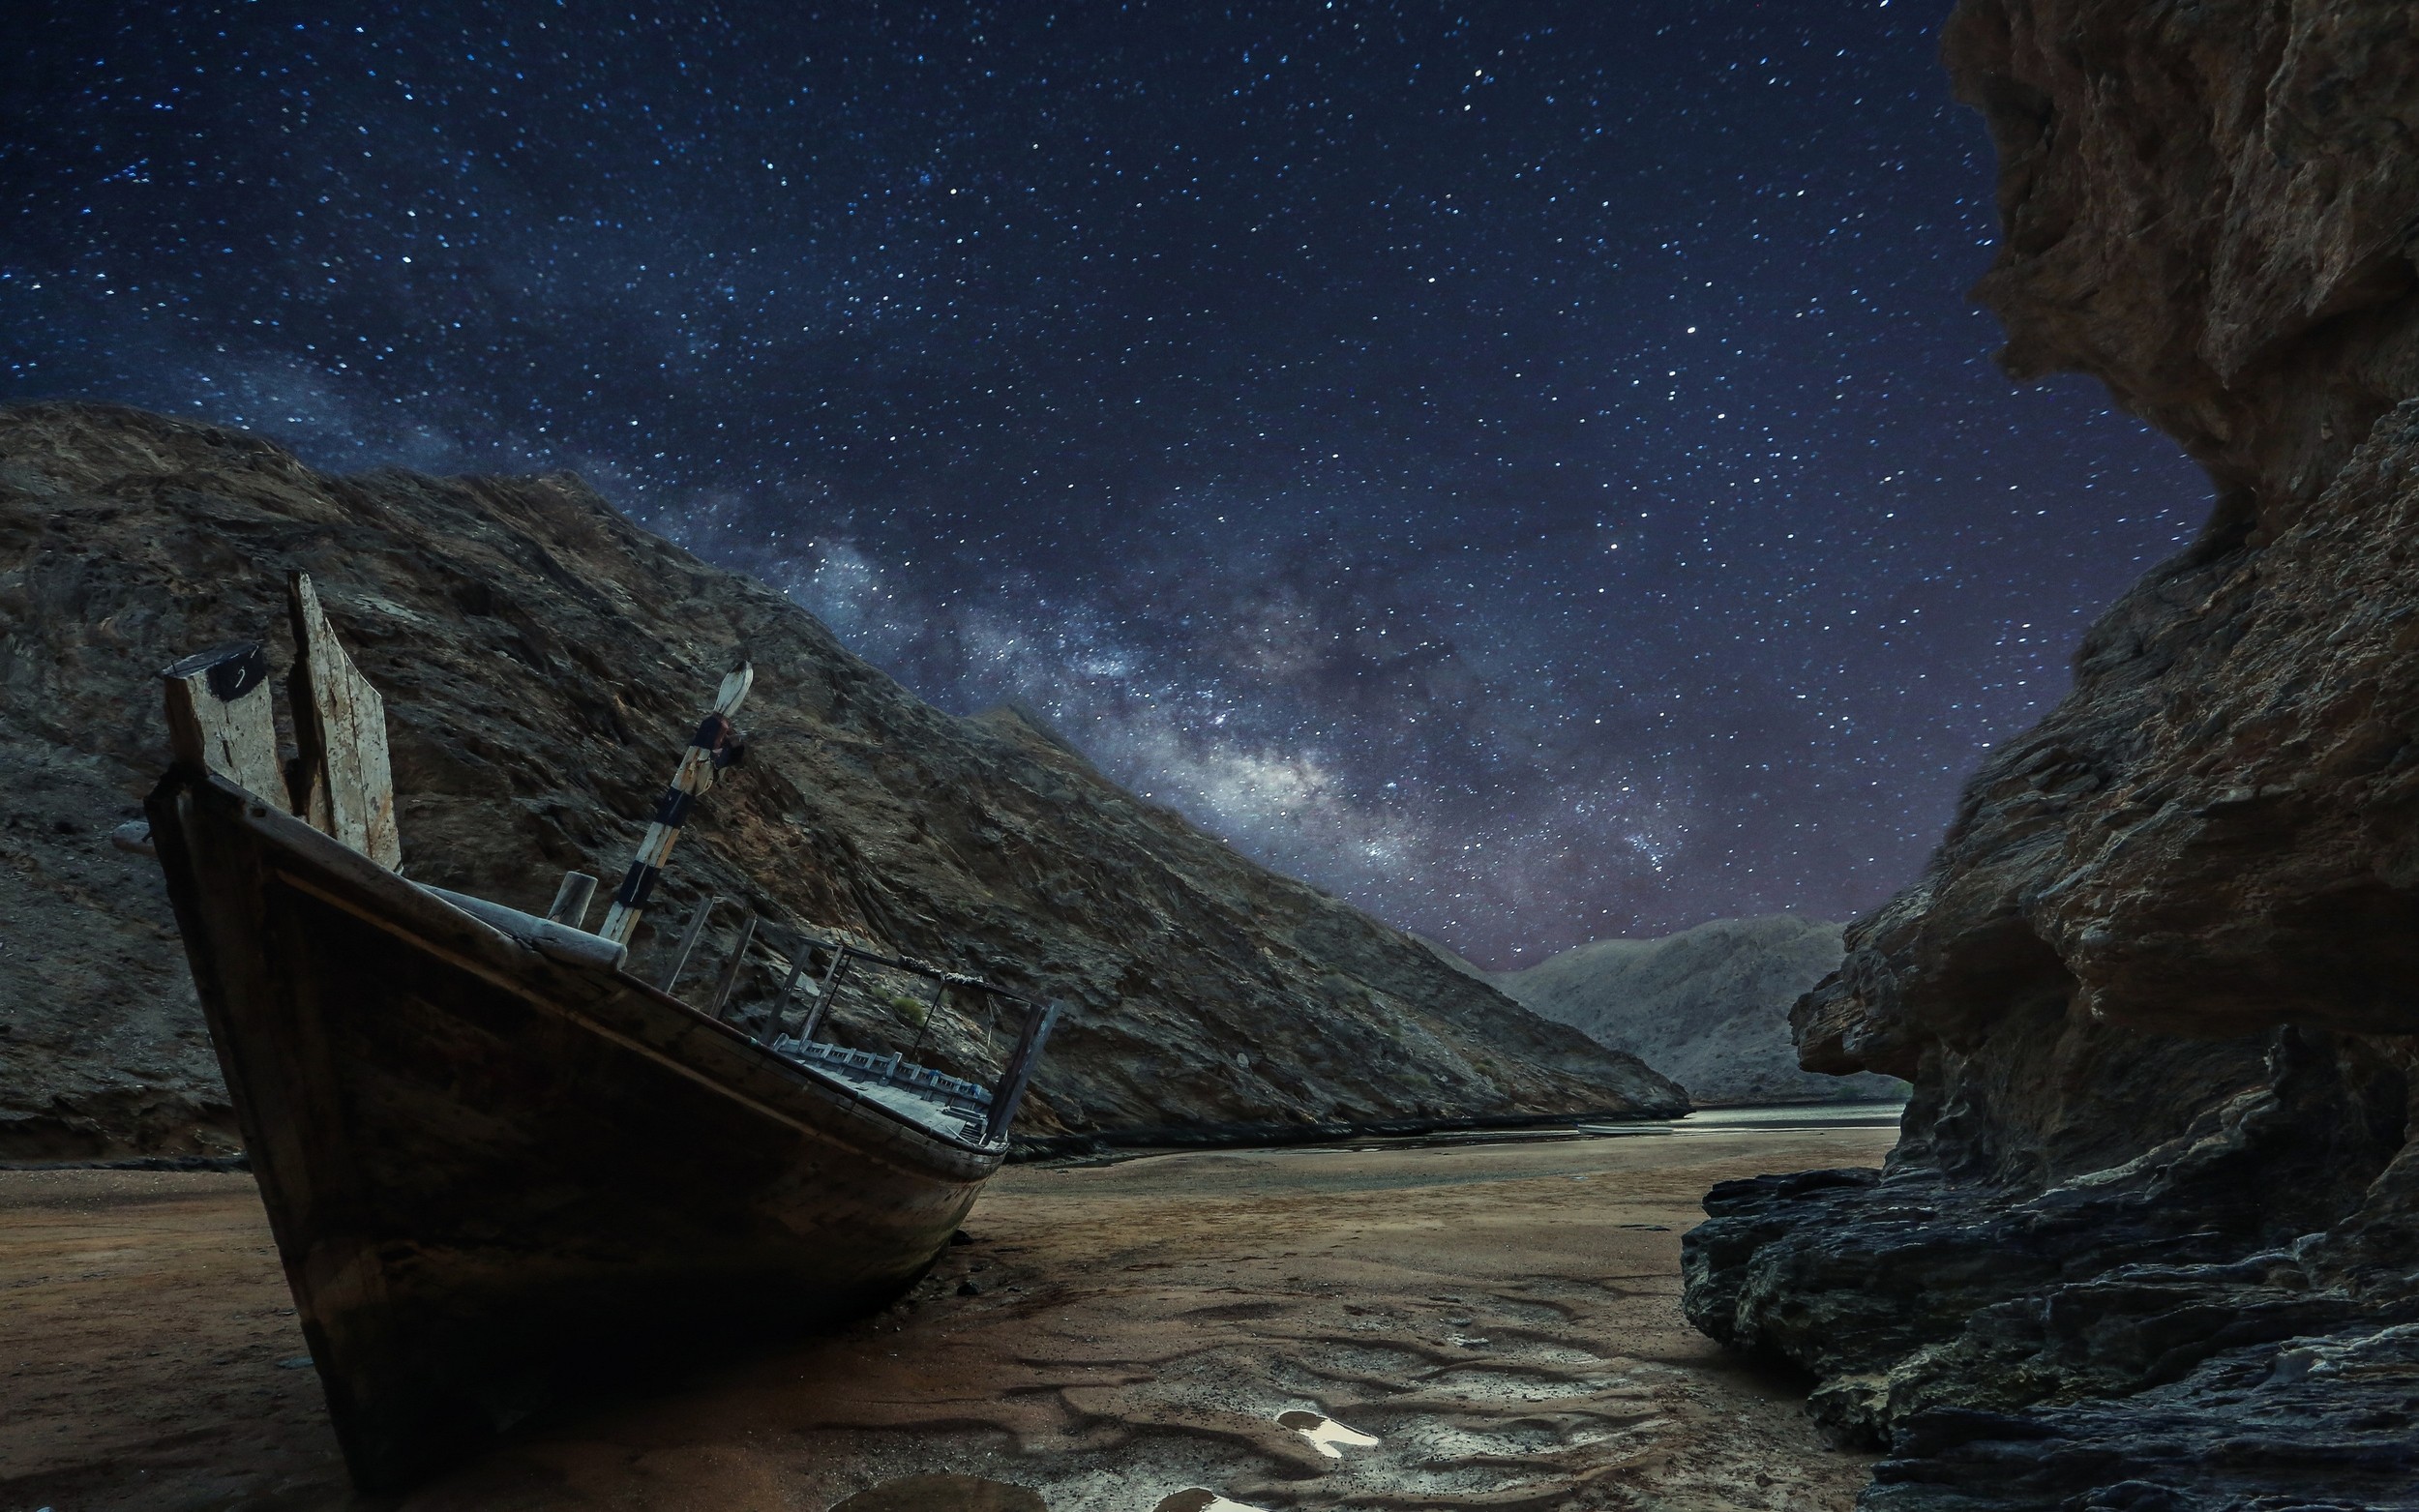 General 2500x1563 nature landscape starry night boat Milky Way puddle sand long exposure wreck vehicle sky stars rocks